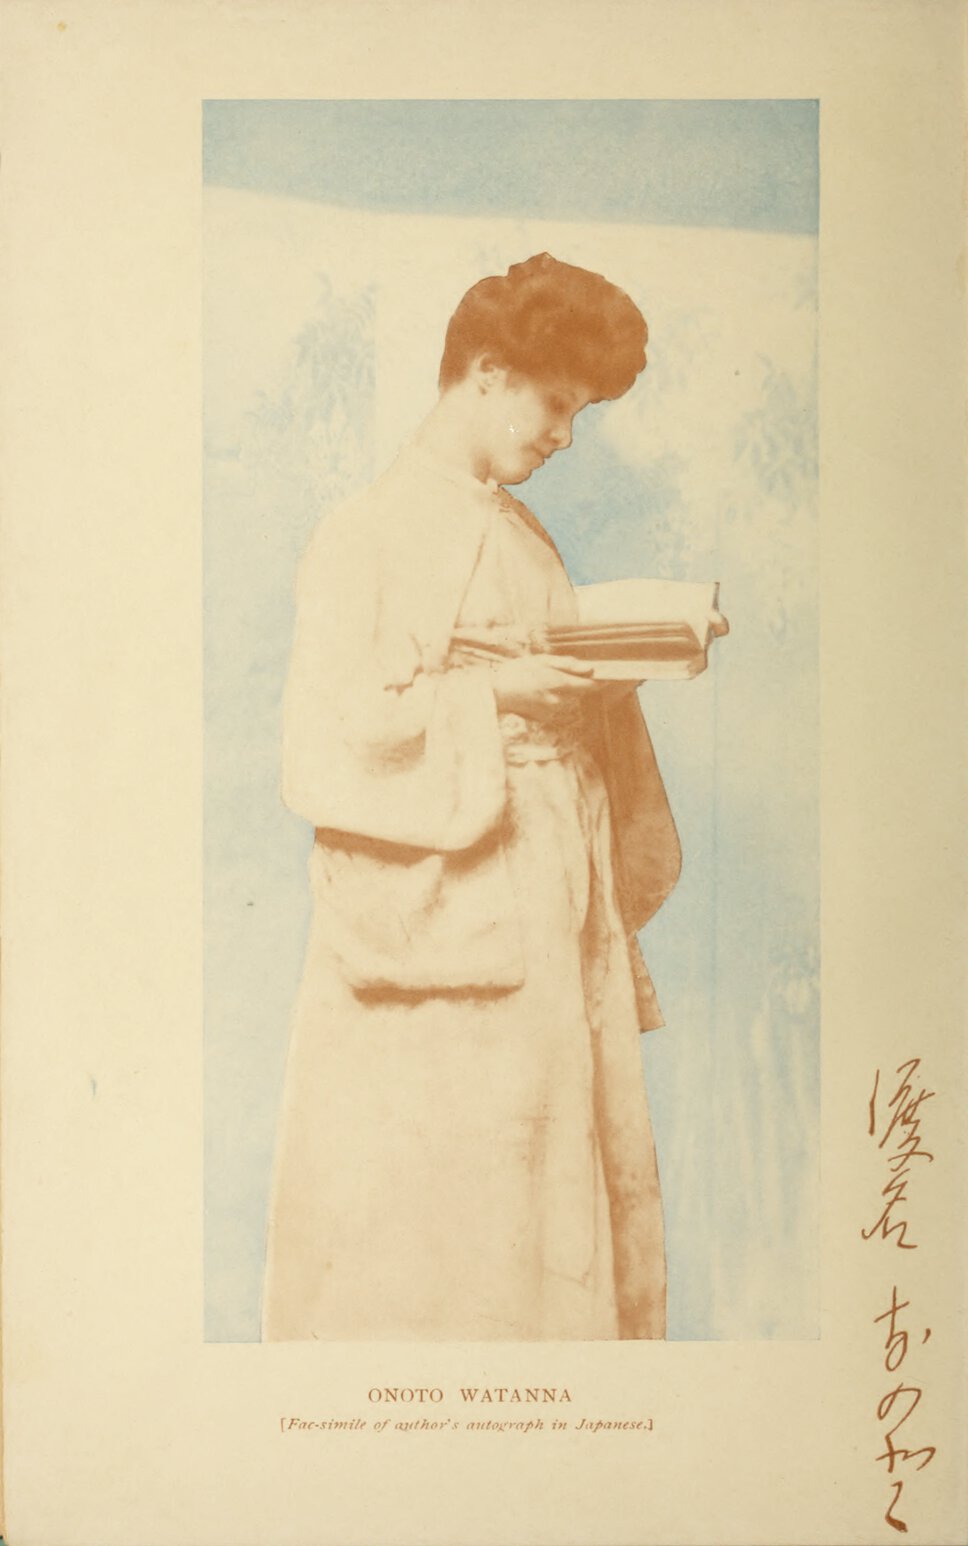 Three-quarters body portrait of Onoto Watanna reading a book with facsimile signature in Japanese.